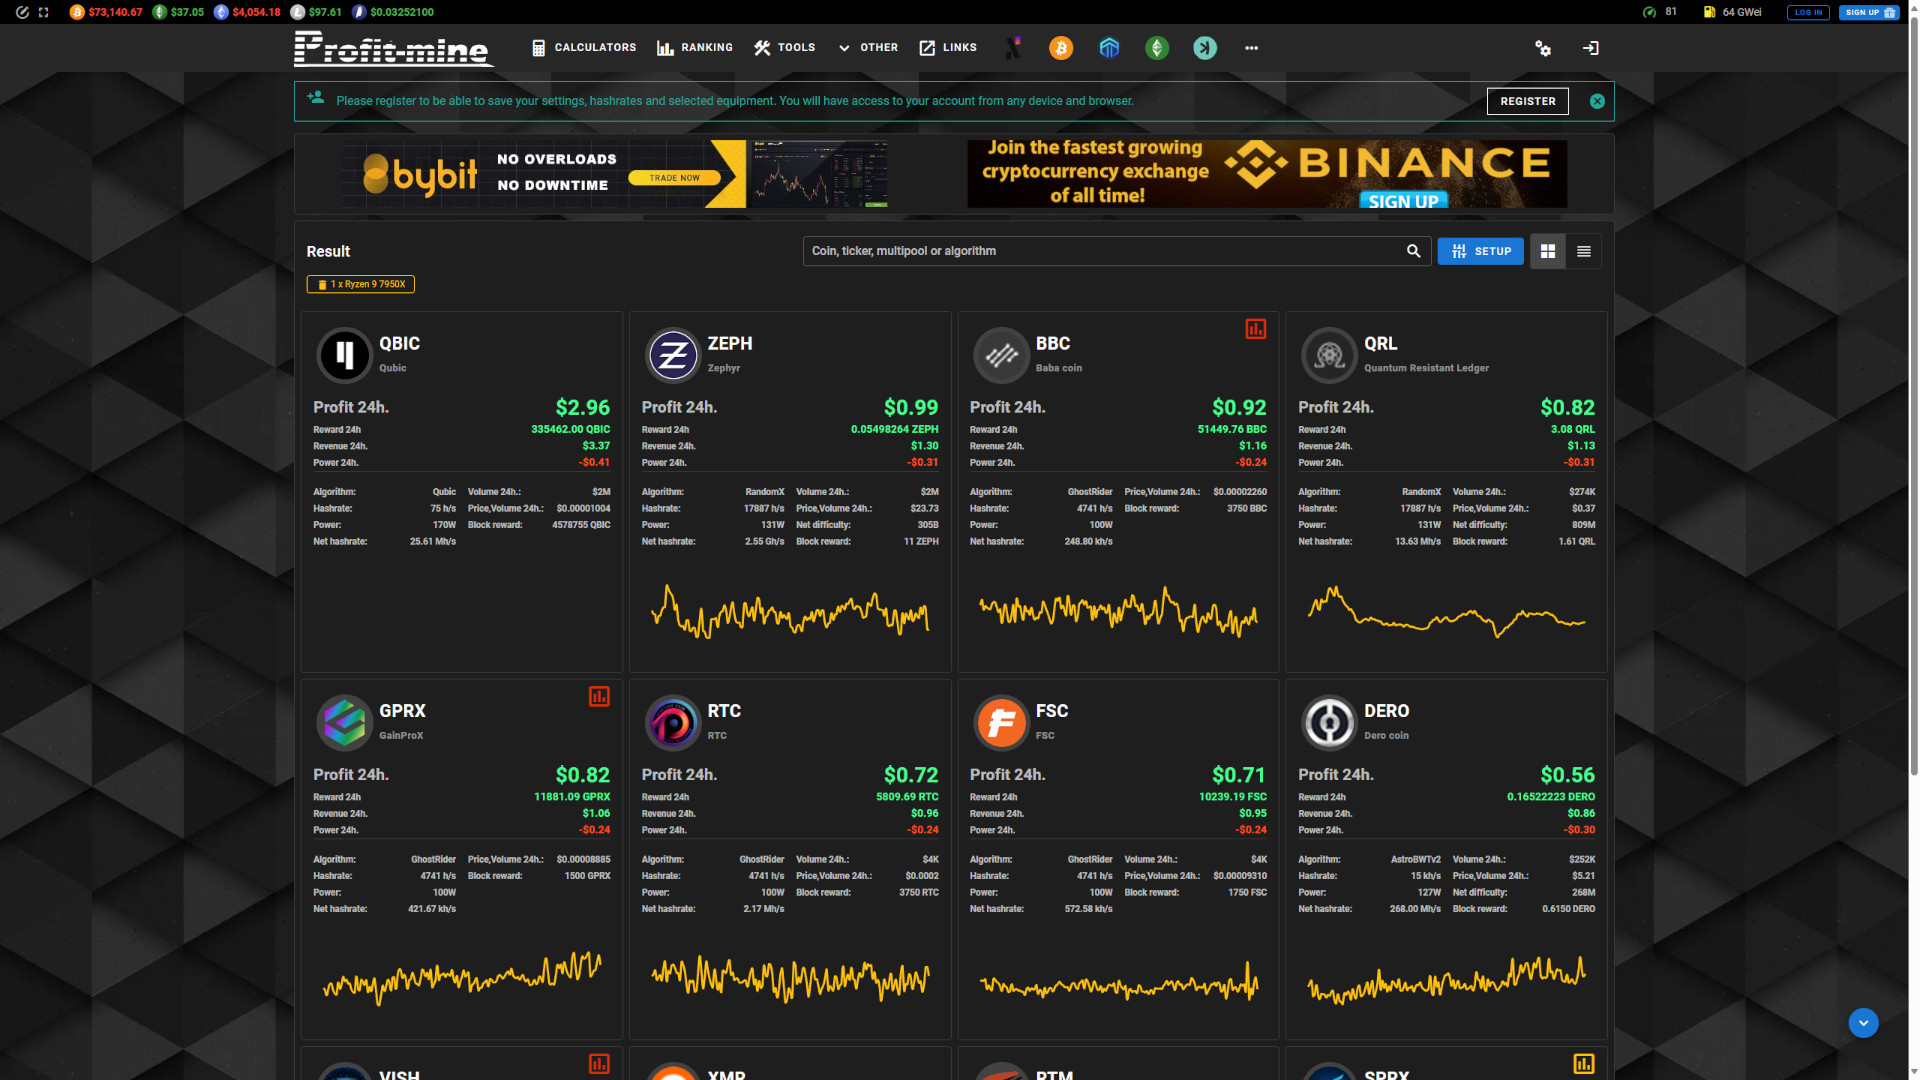 A screenshot from Profit Mine, detailing the daily profitability of mining using a 7950X CPU